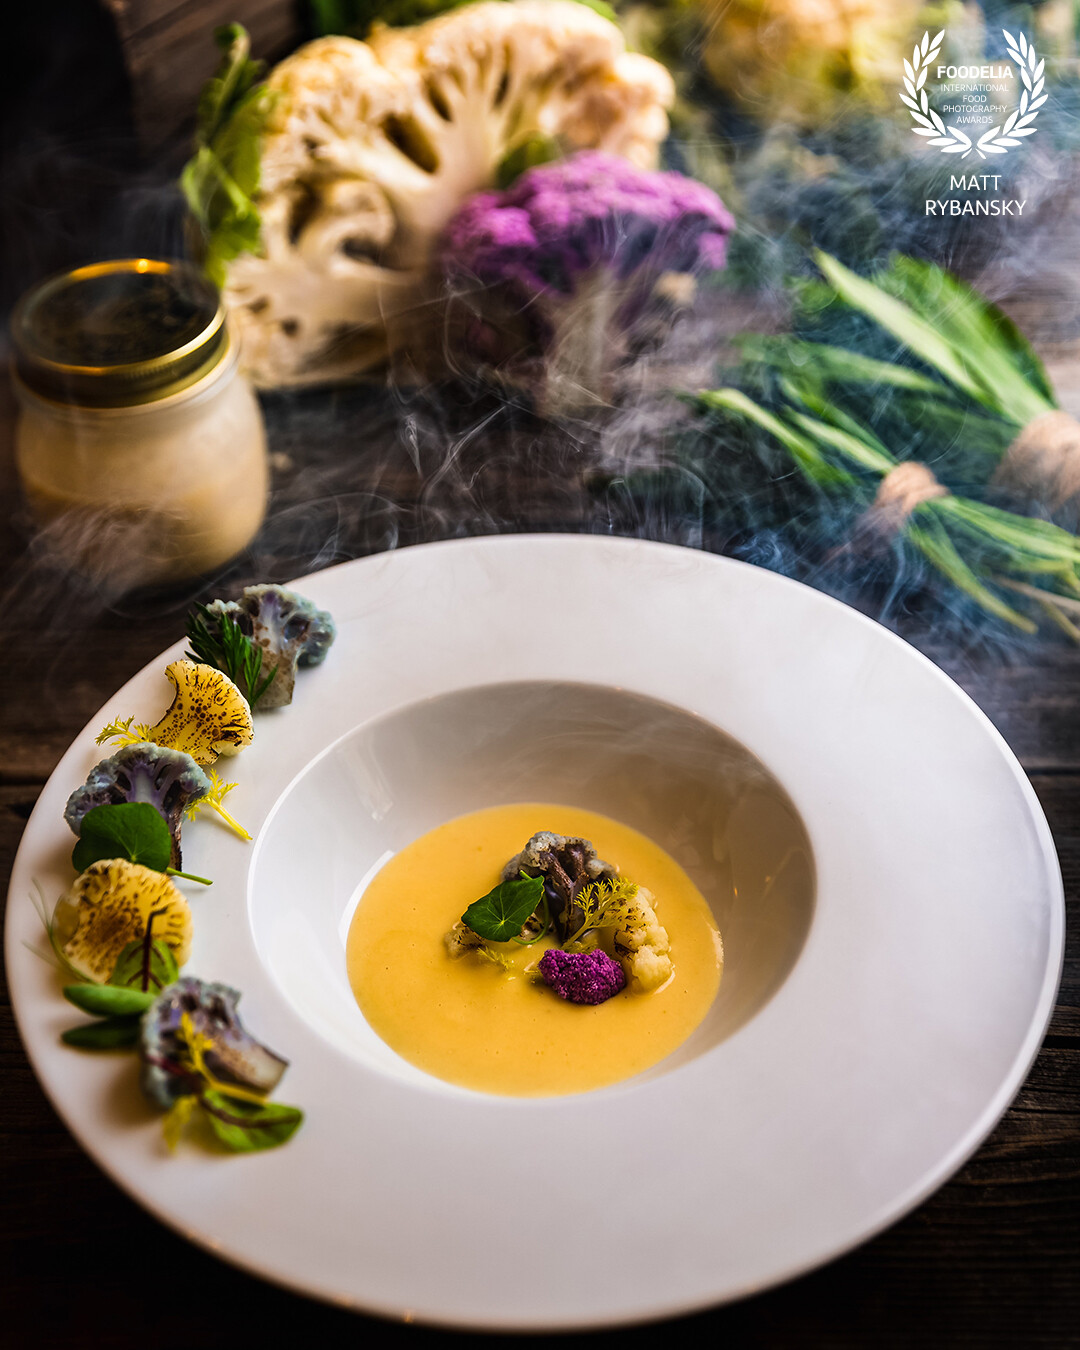 This was an incredible photoshooting of new French menu for Slovak Mercure Hotel, now known as @clarioncongresshotelbratislava. I'm in love with small touch of violet colour. <br />
<br />
Bratislava, Slovakia